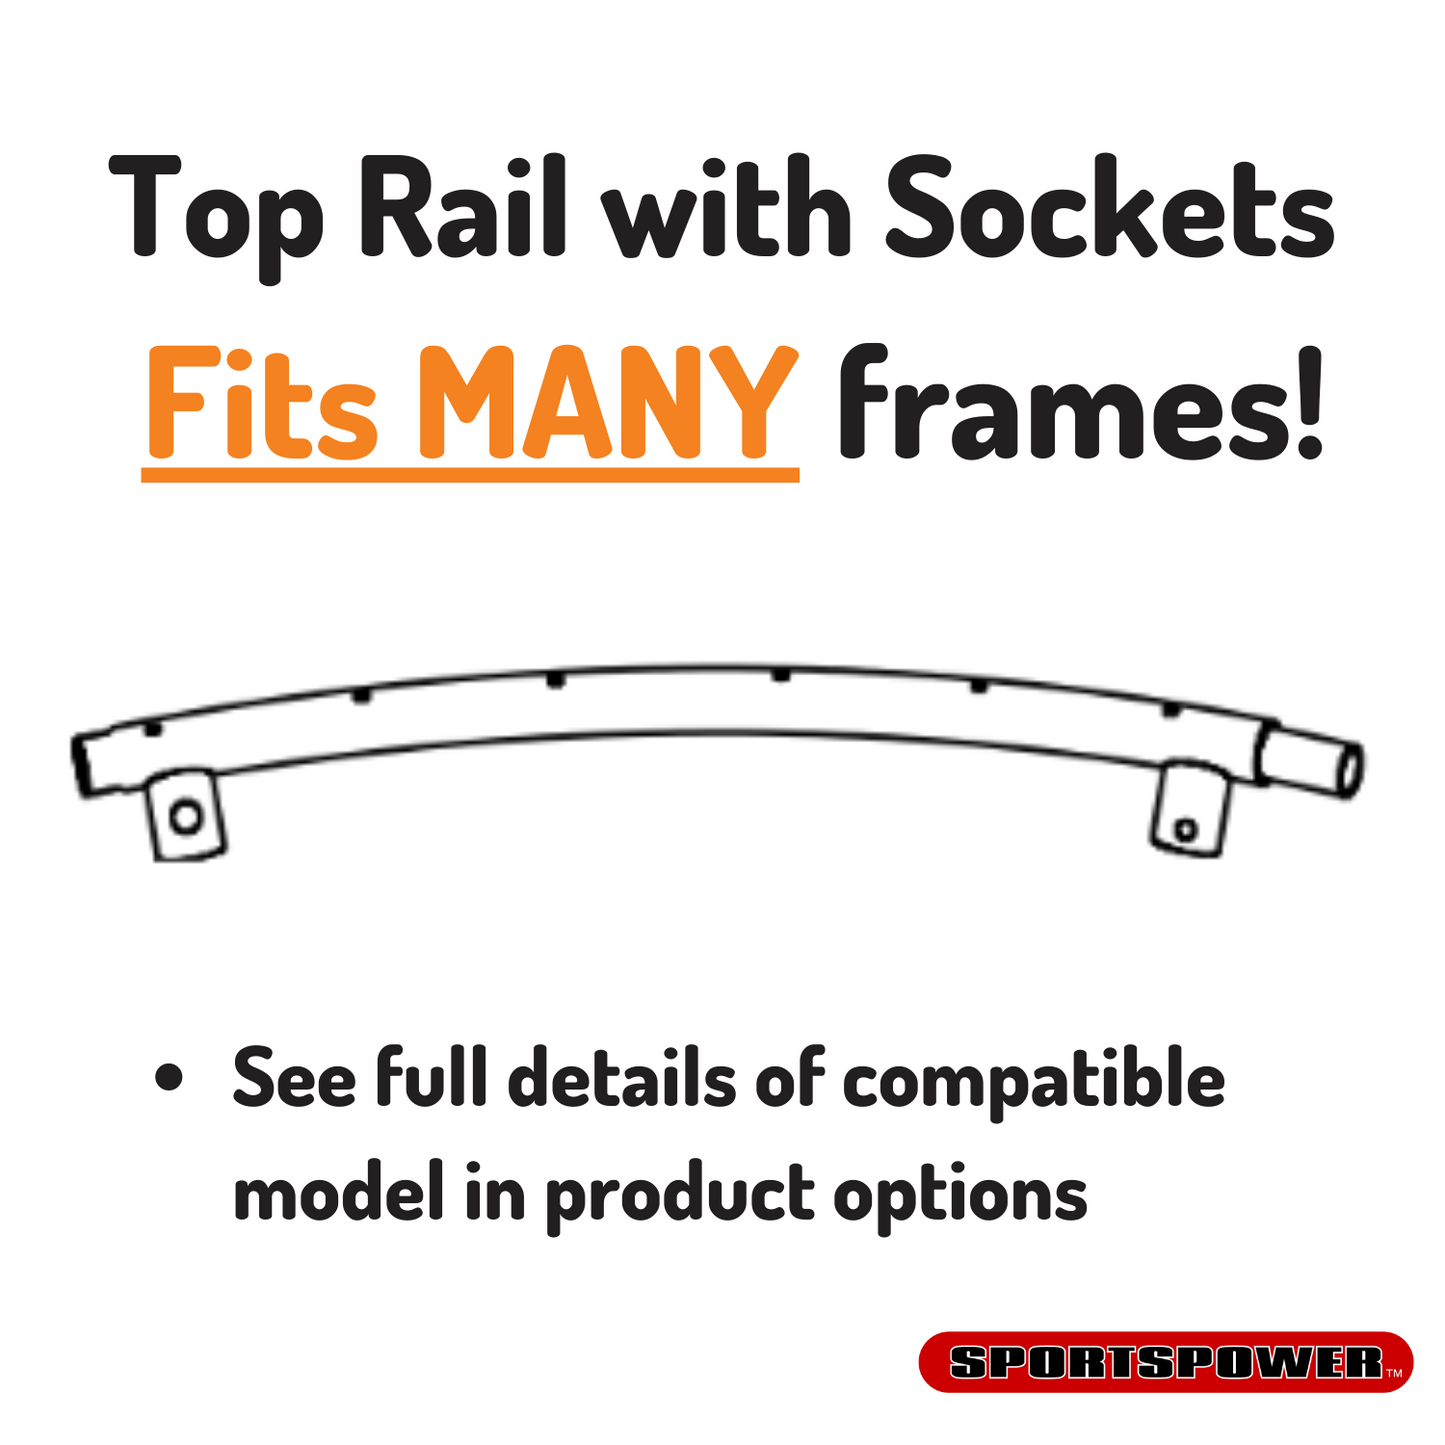 Top Rail with Sockets for the 12'  Models